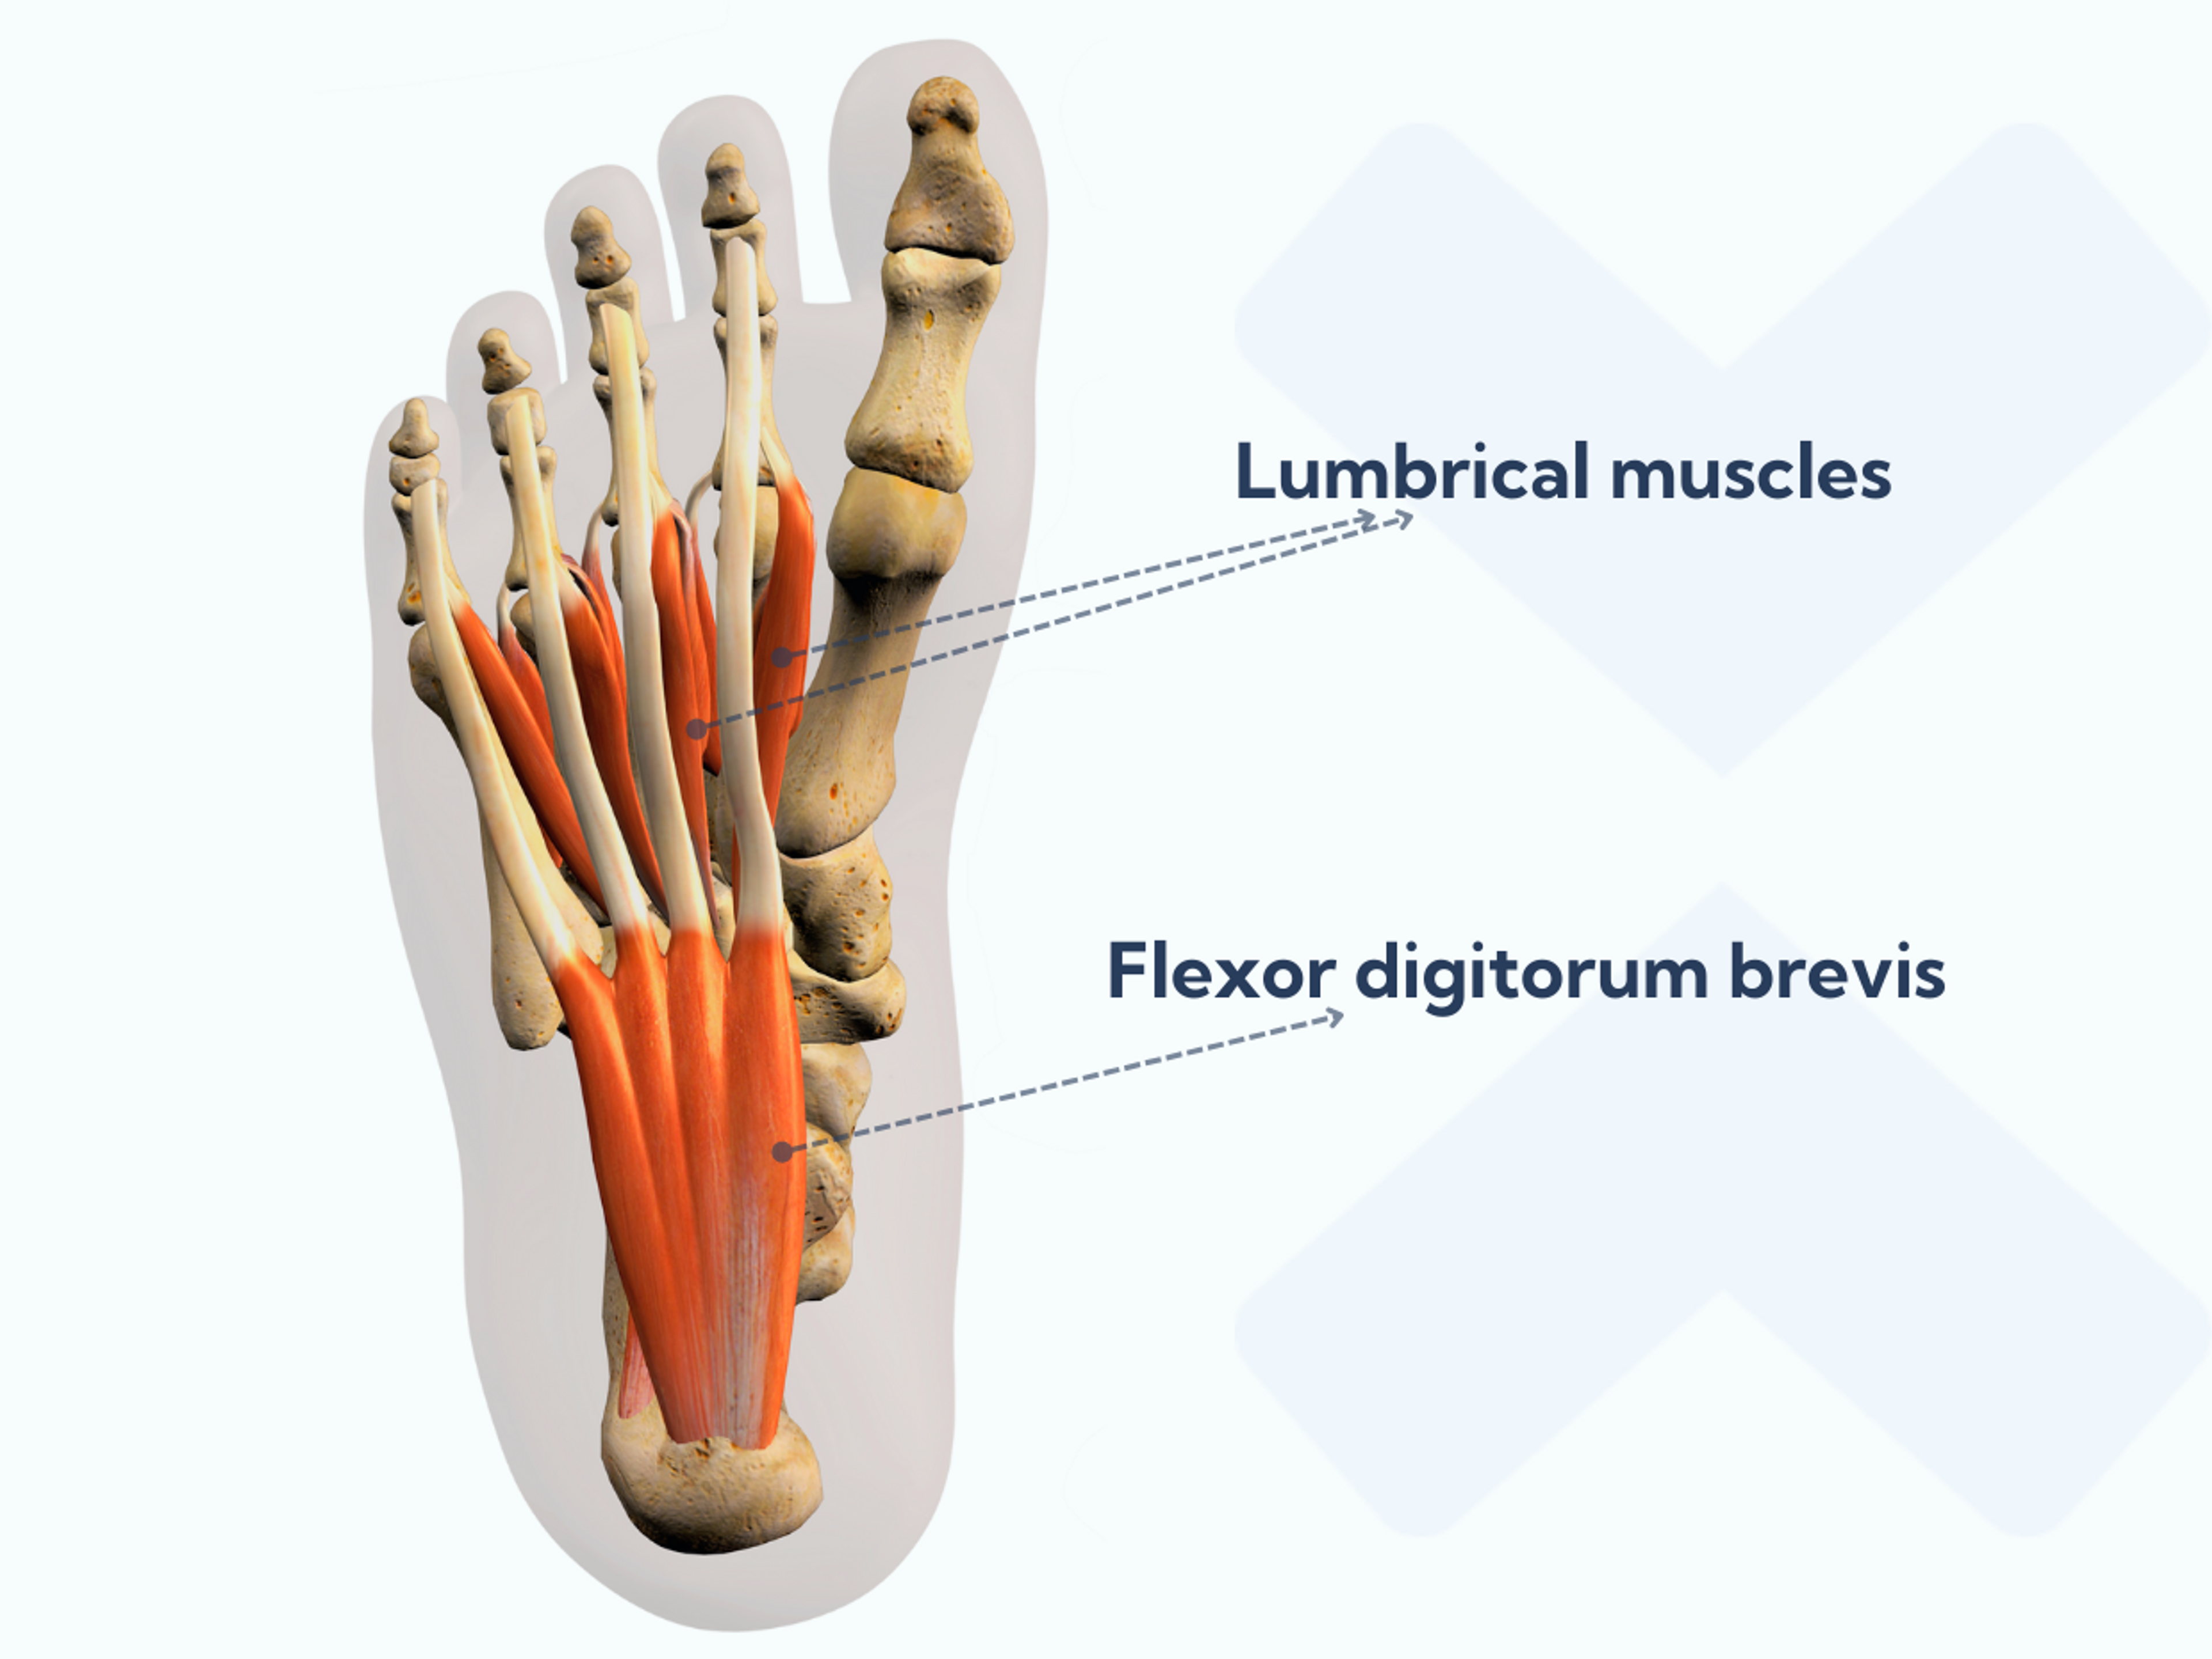 The lumbrical and flexor digitorum brevis muscles form the deep intrinsic muscles of the foot.